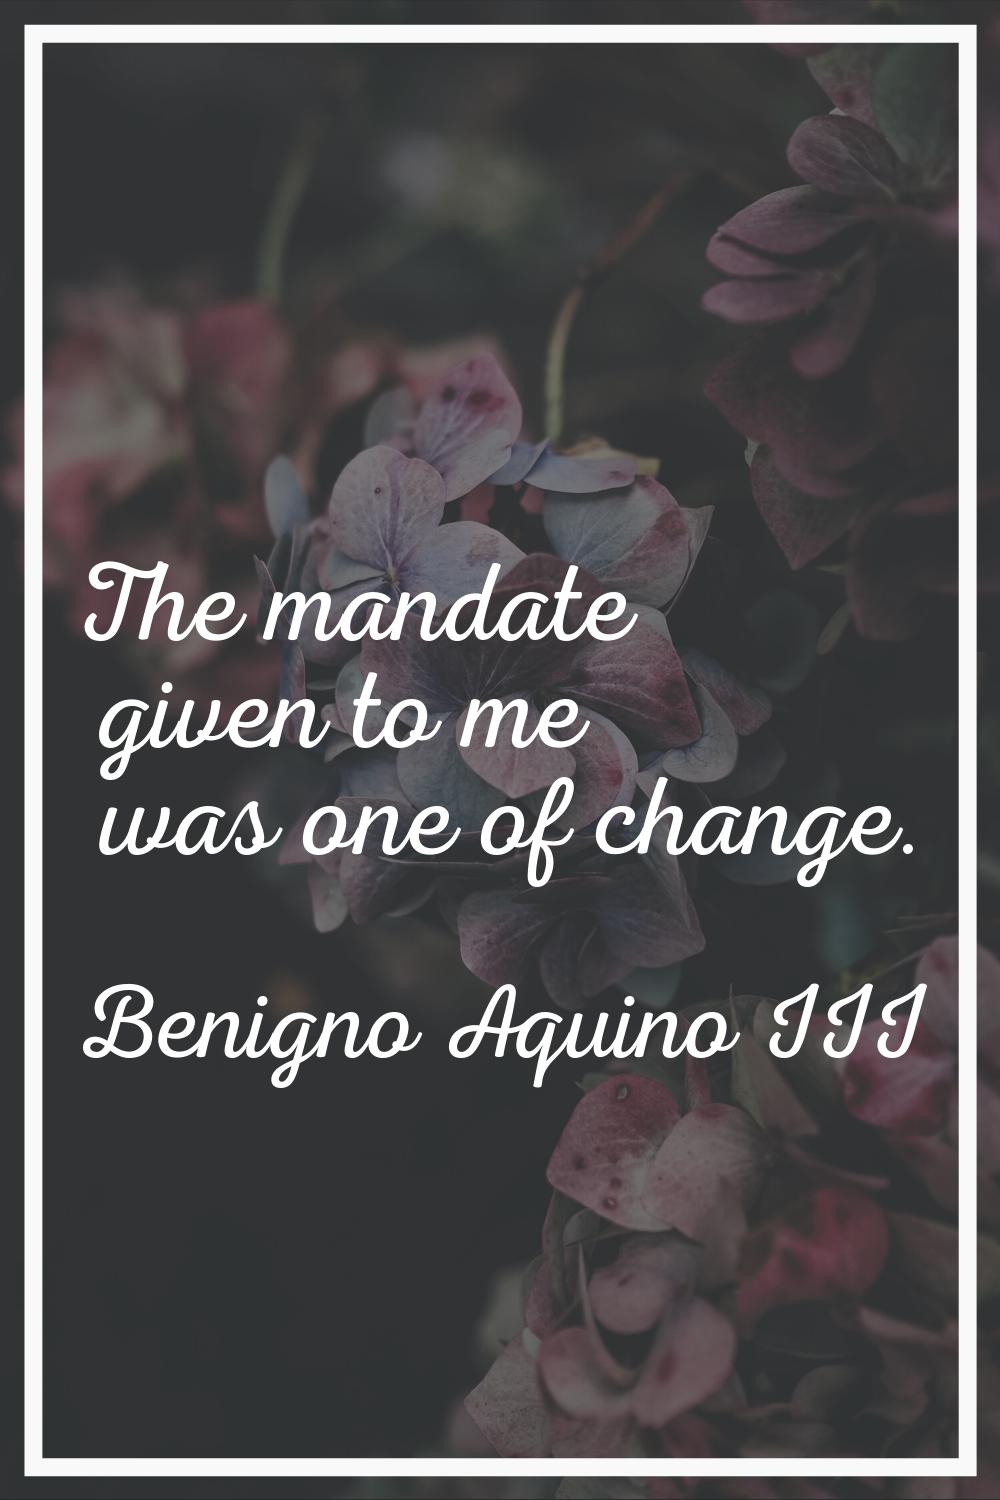 The mandate given to me was one of change.